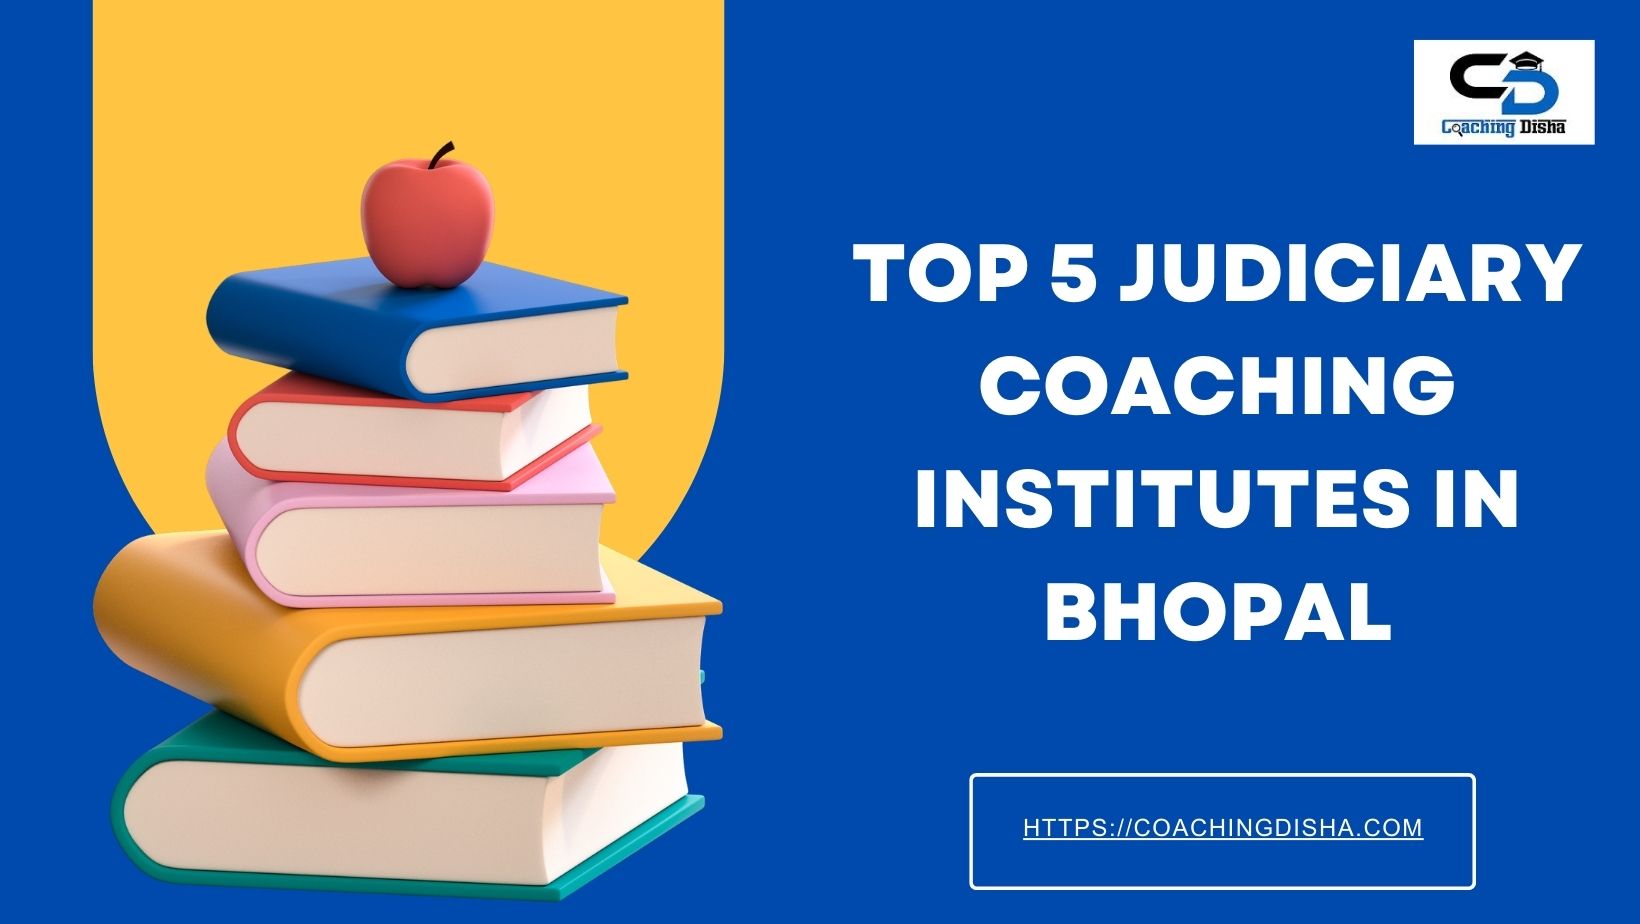 Top 5 Judiciary Coaching in Bhopal: Fees, Contact Details